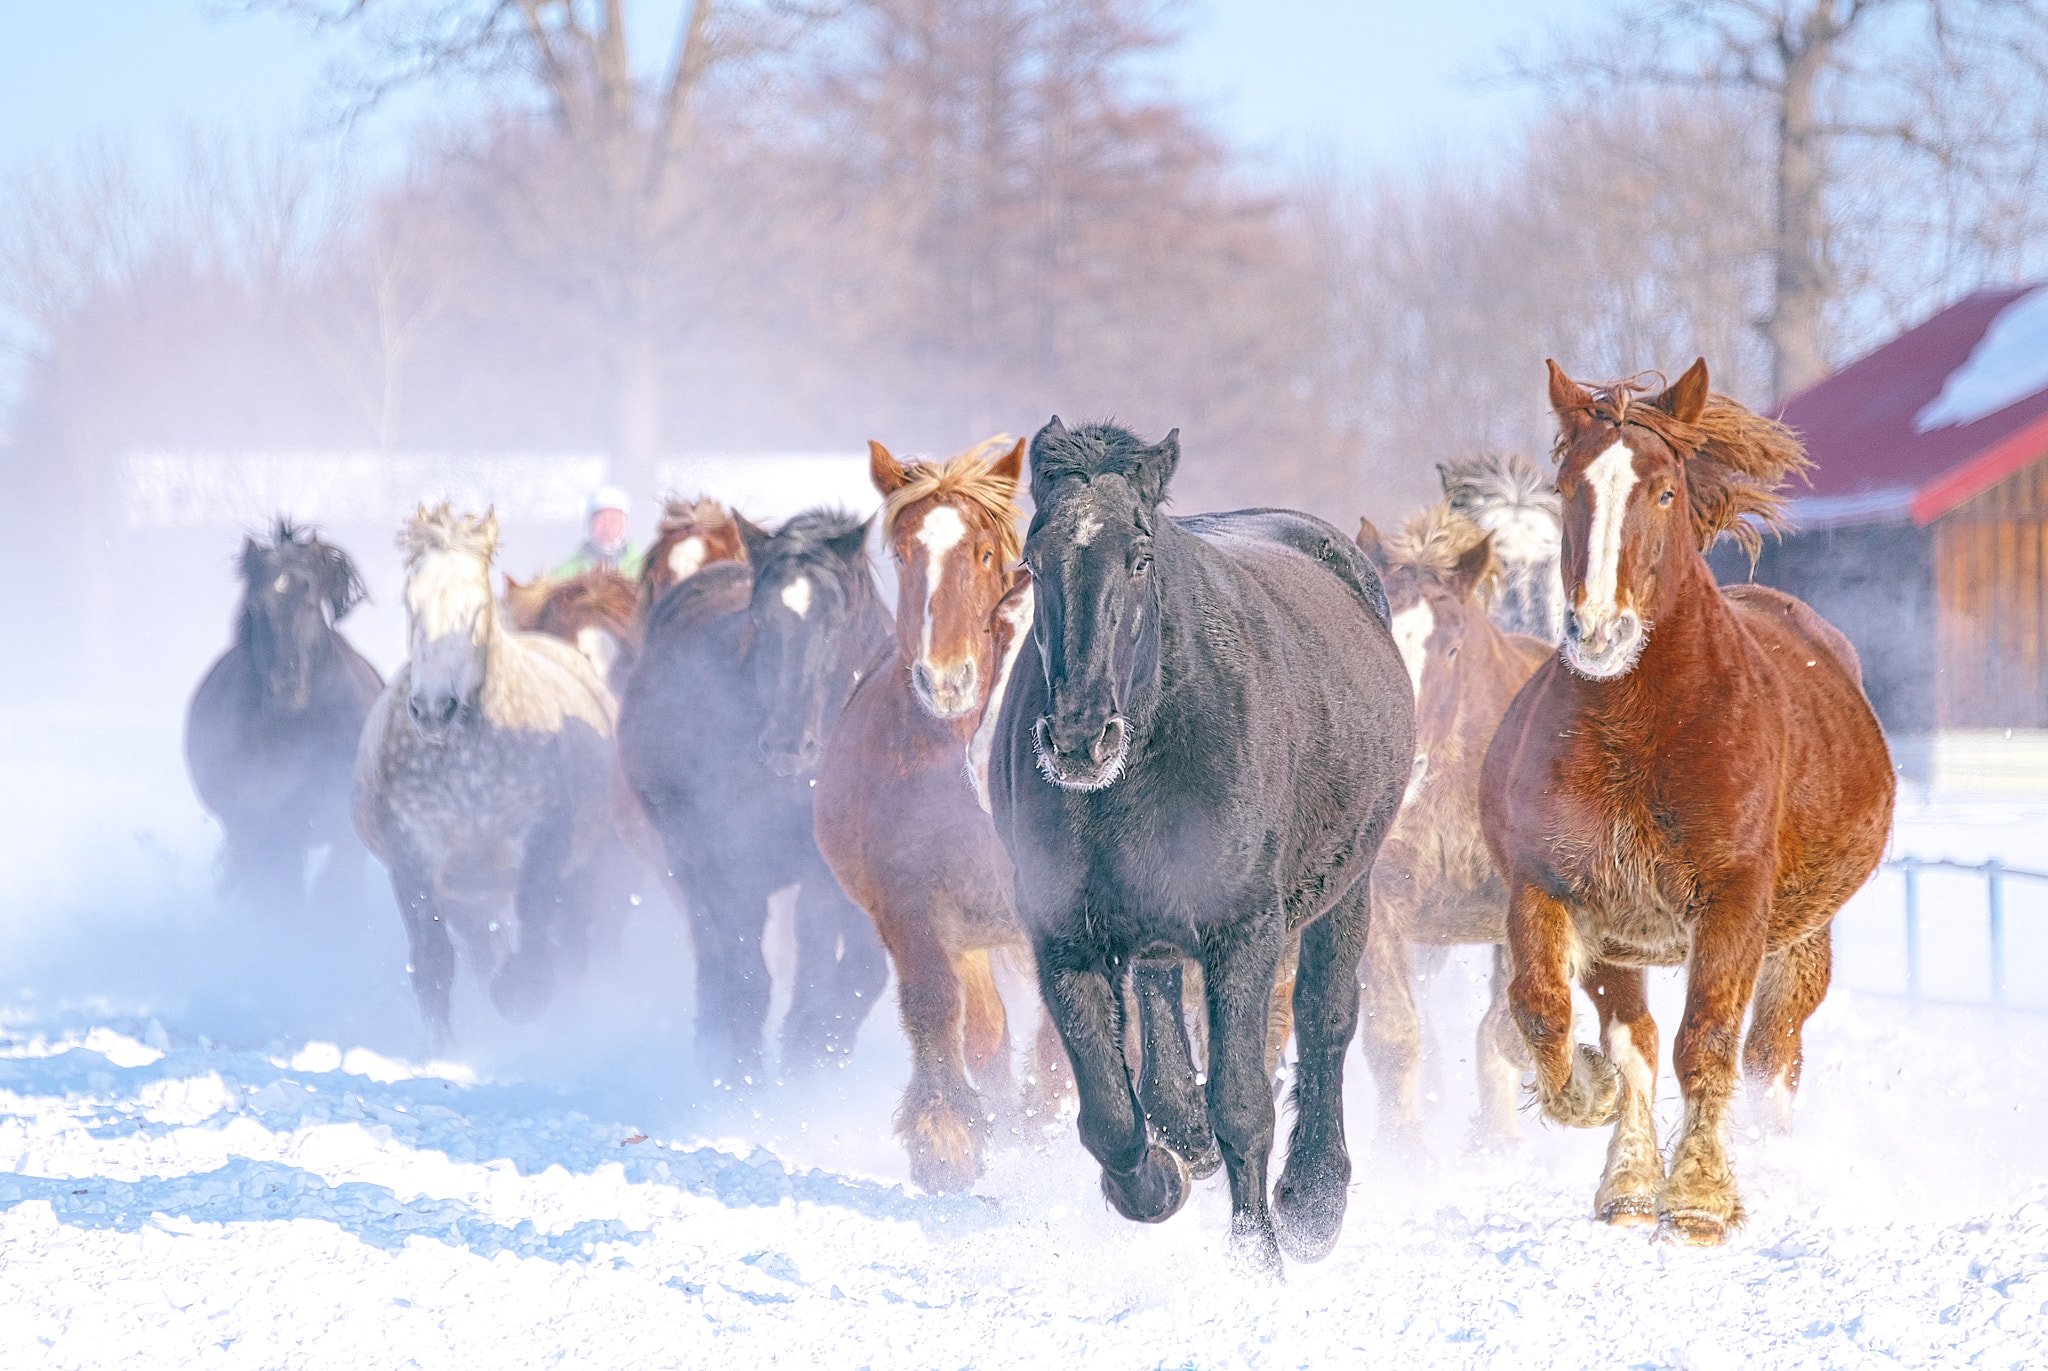 Sony a99 II sample photo. You can lead horses to snow, but you cannot make them run photography